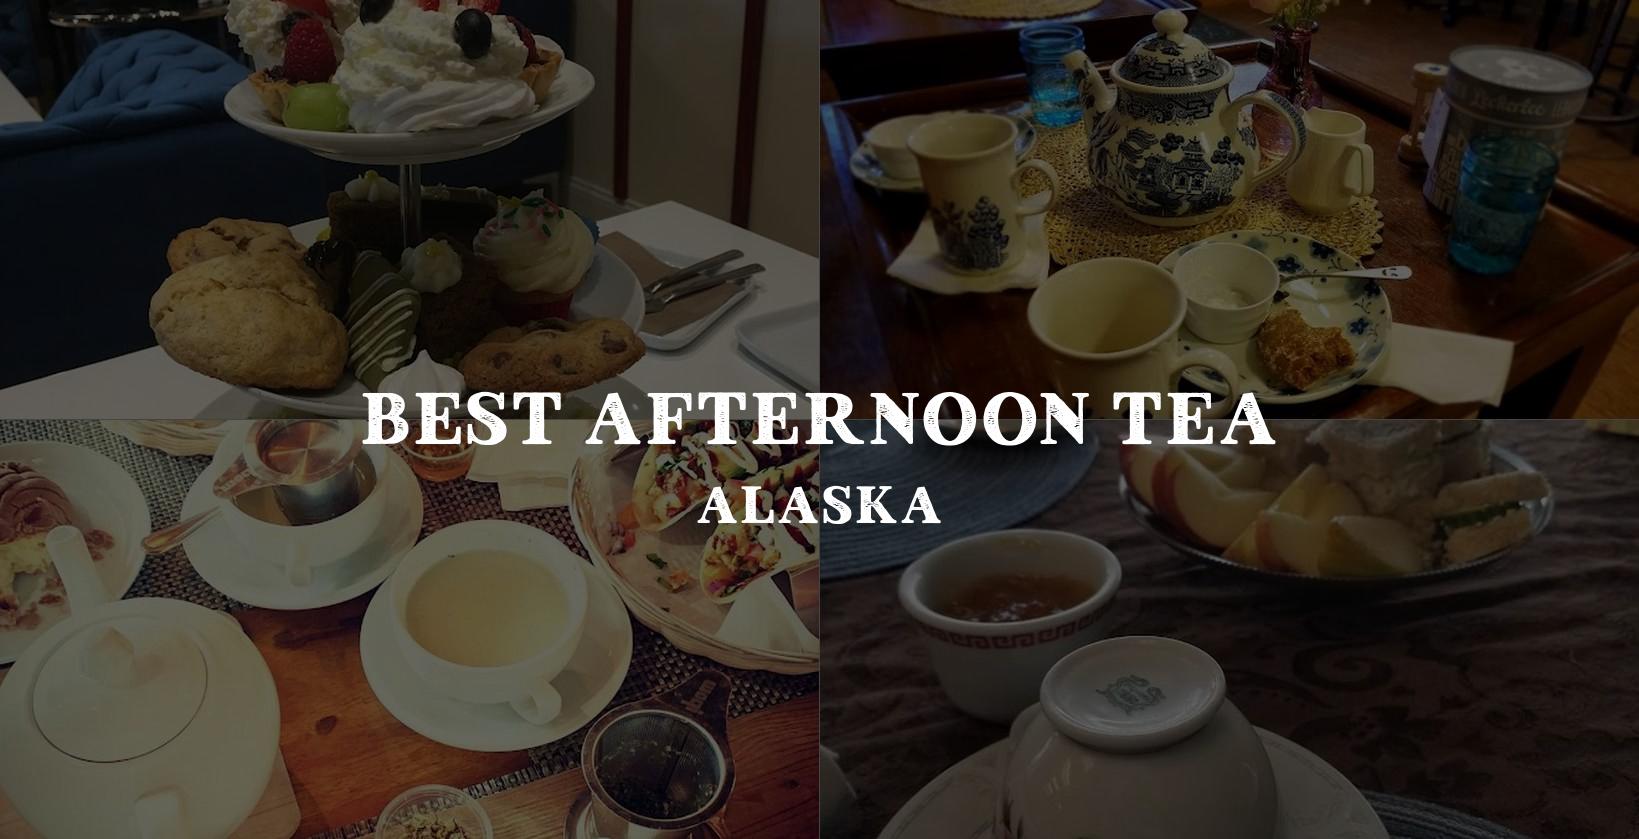 Choosing the right spot for afternoon tea in Alaska